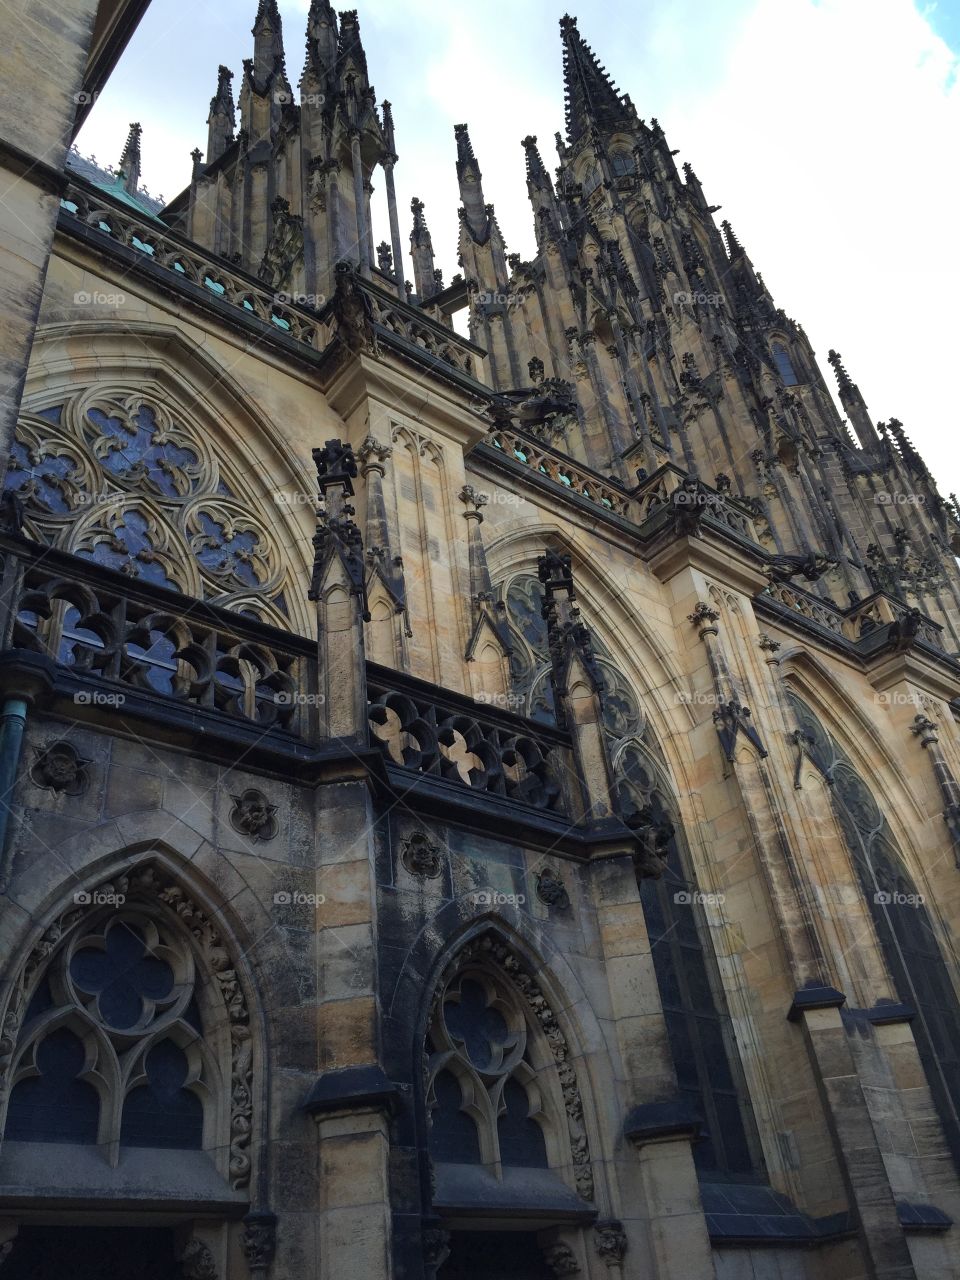 Outside St Vitus cathedral 